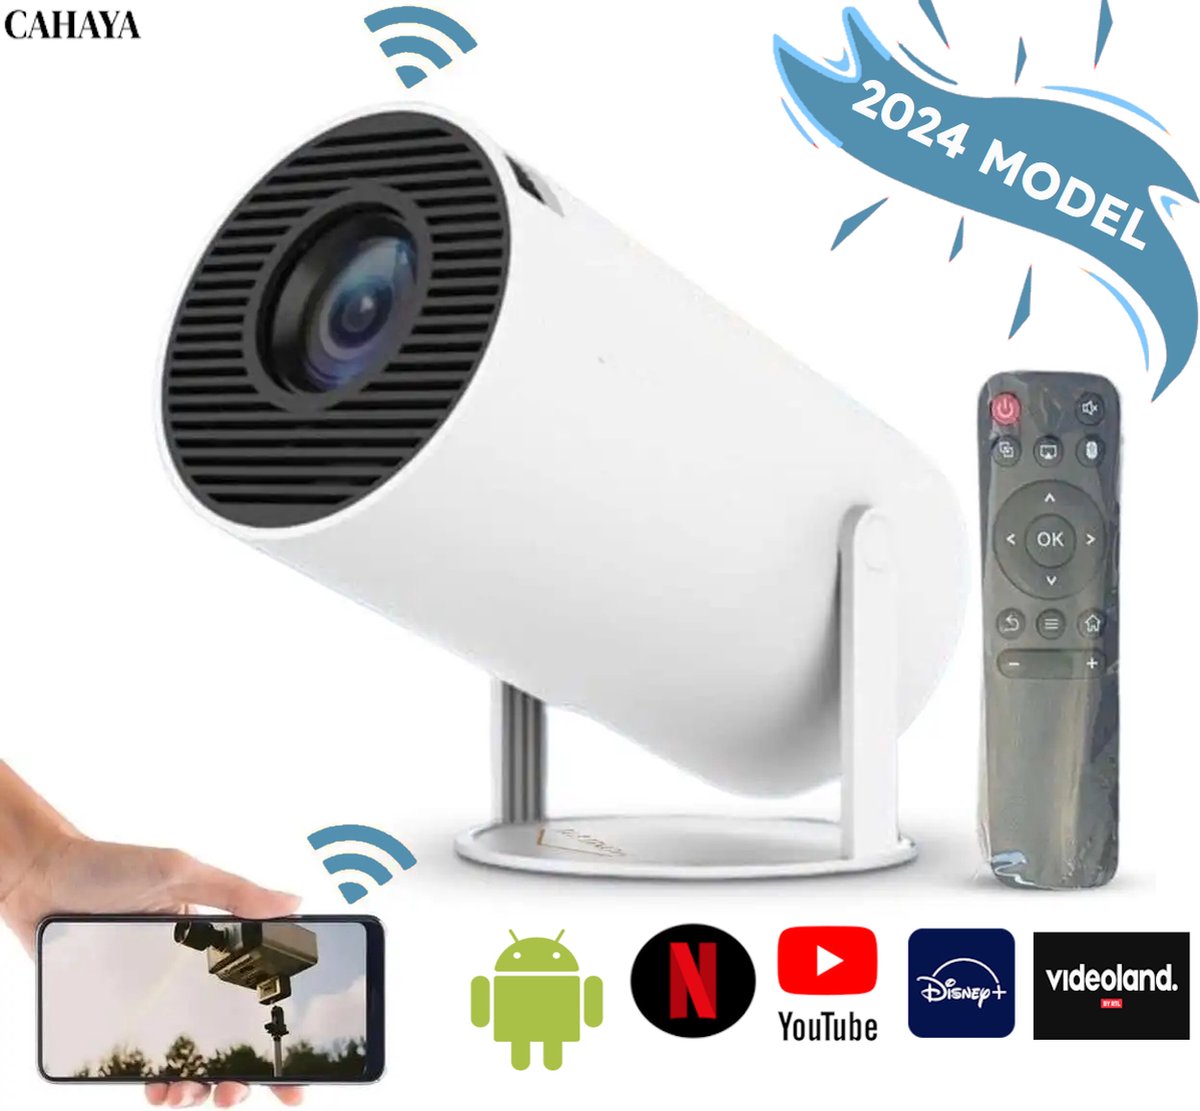 Cahaya 2024 model - Mini Beamer - mini projector - draagbare beamer - projector / beamer - Geïntegreerd Android 11.0 systeem - Screen mirroring smartphone - Home cinema - Magcubic HY300